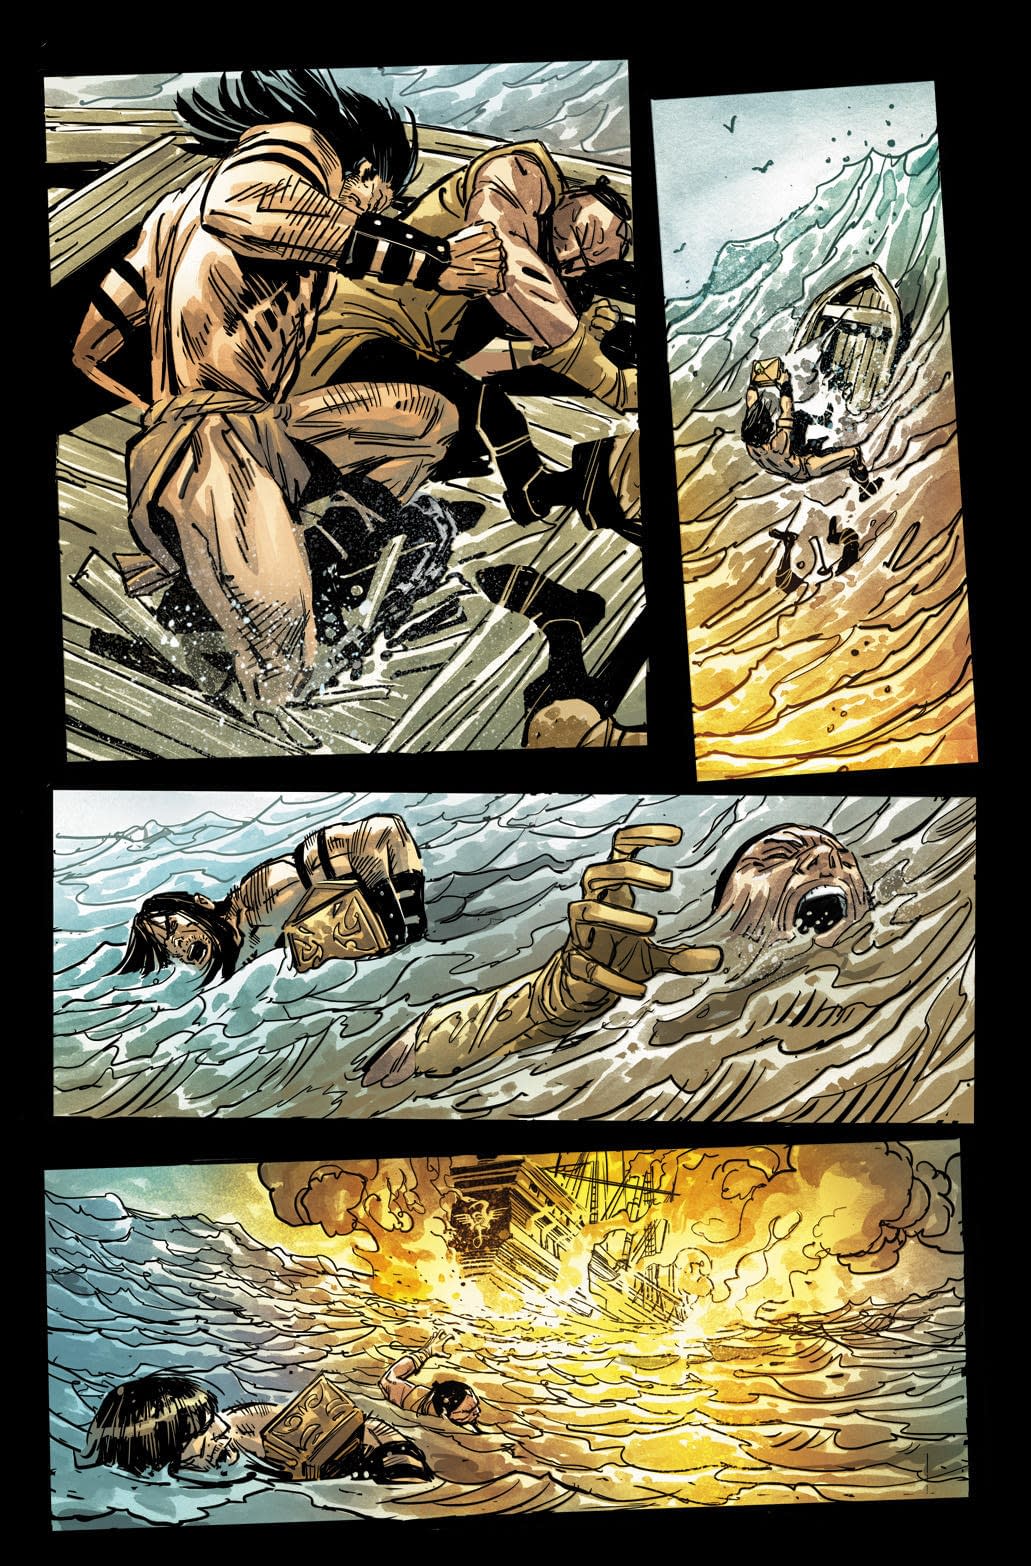 Conan Goes for the Low Blow in First Look at Savage Sword #1